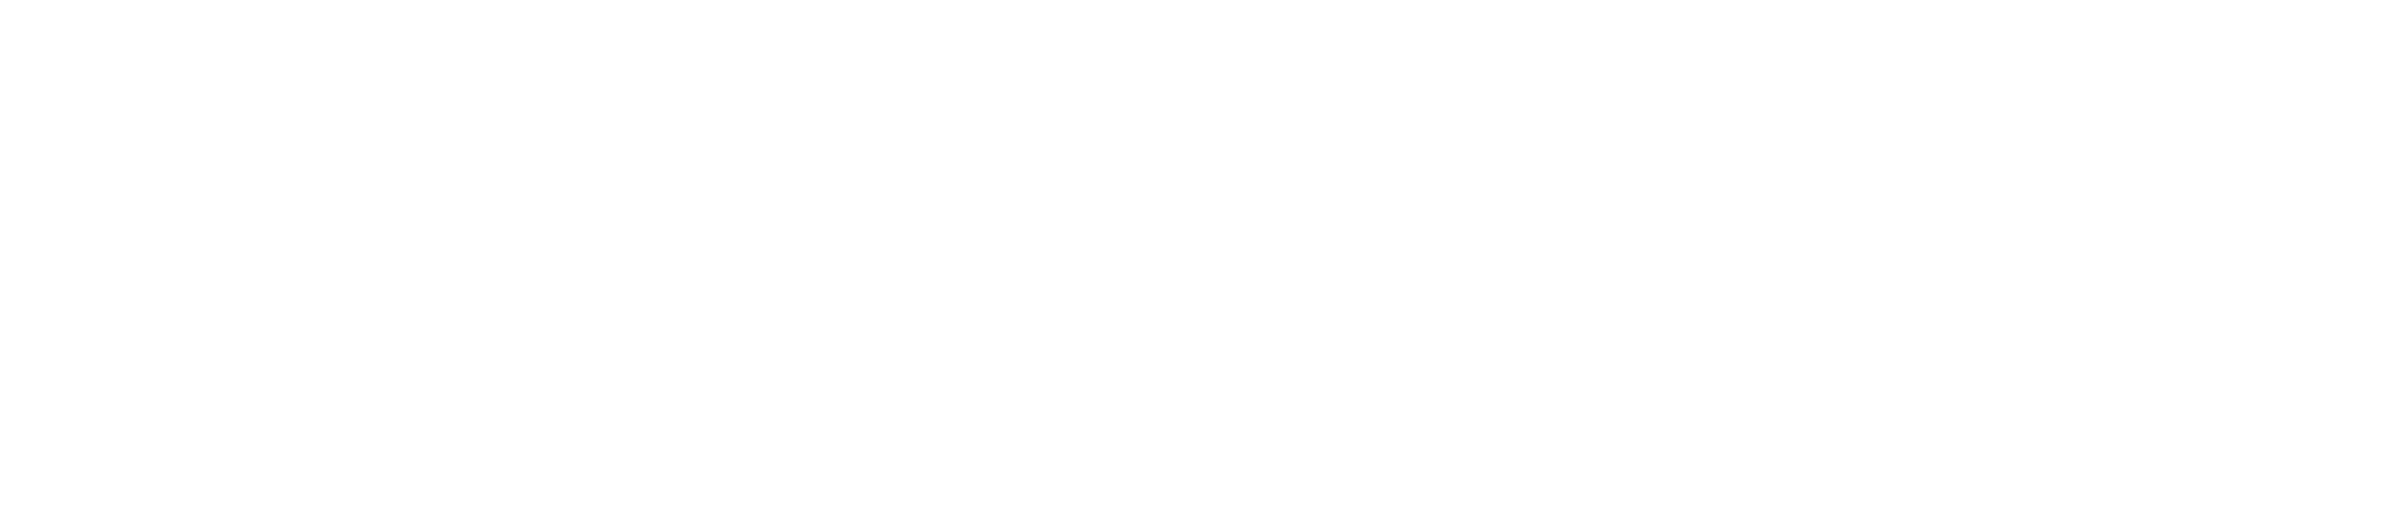 real people real seo white logo